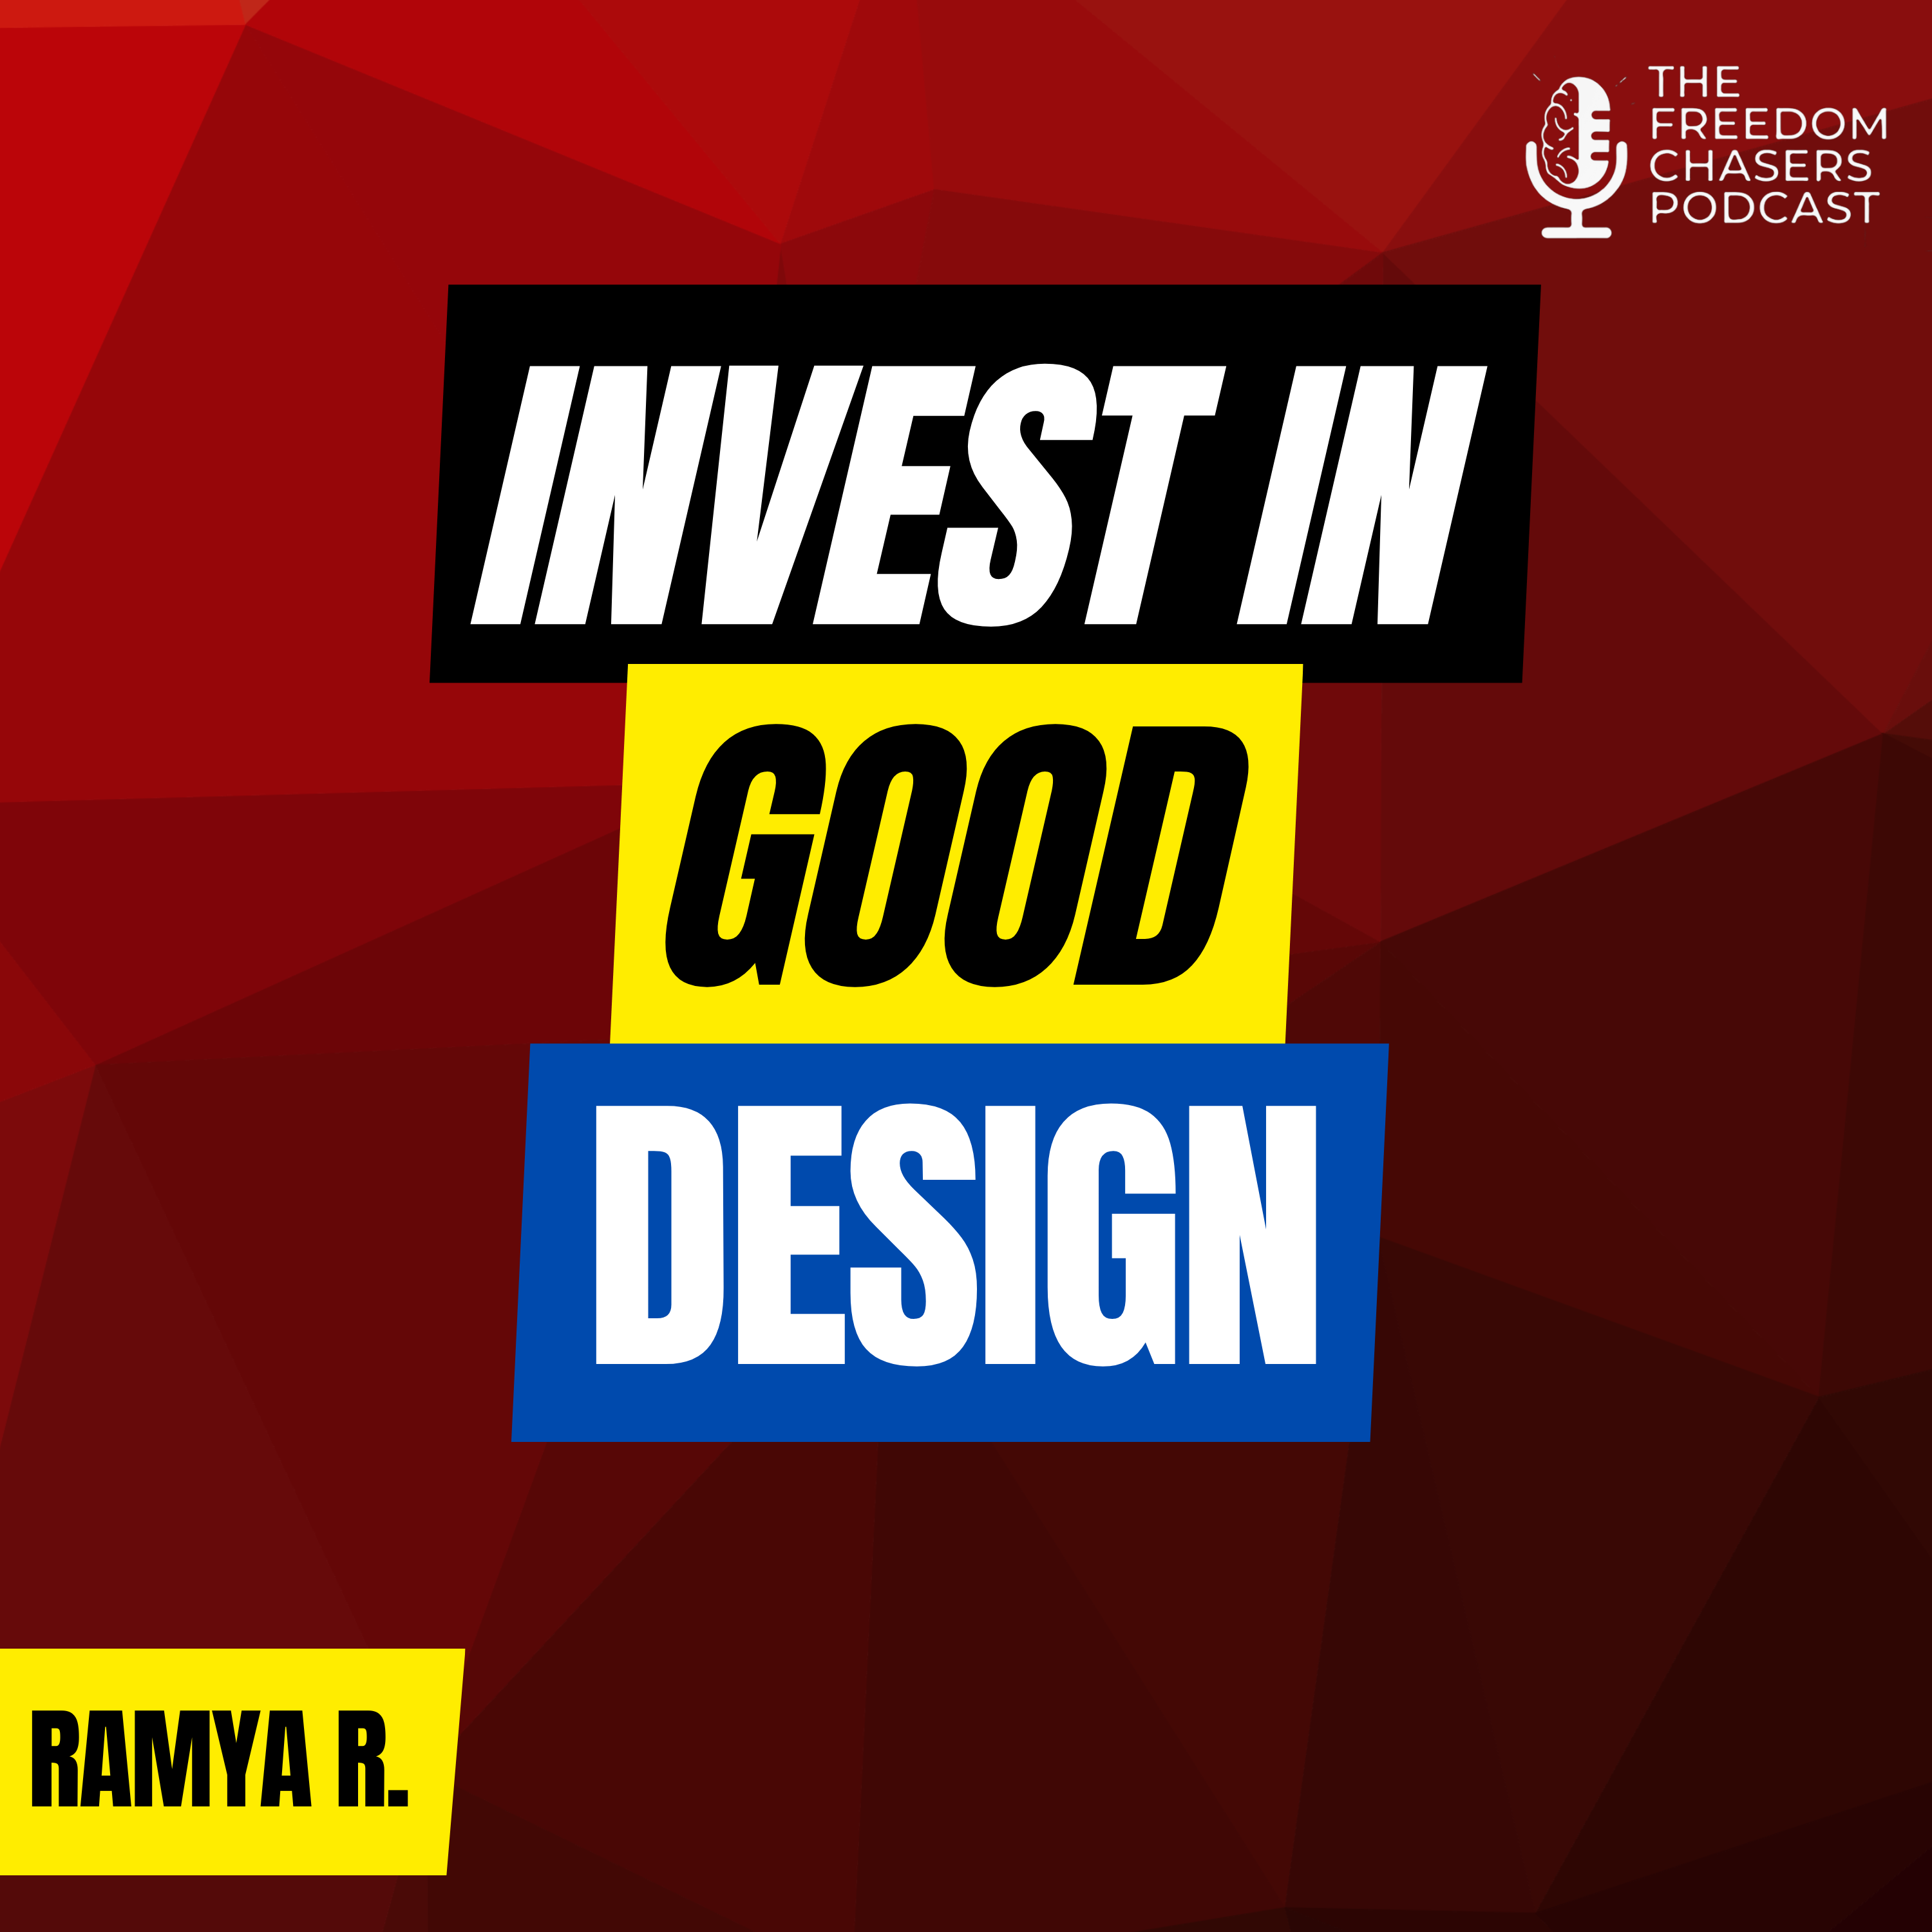 The Art of Design: How it Can Make or Break Your Real Estate Business with Ramya R.